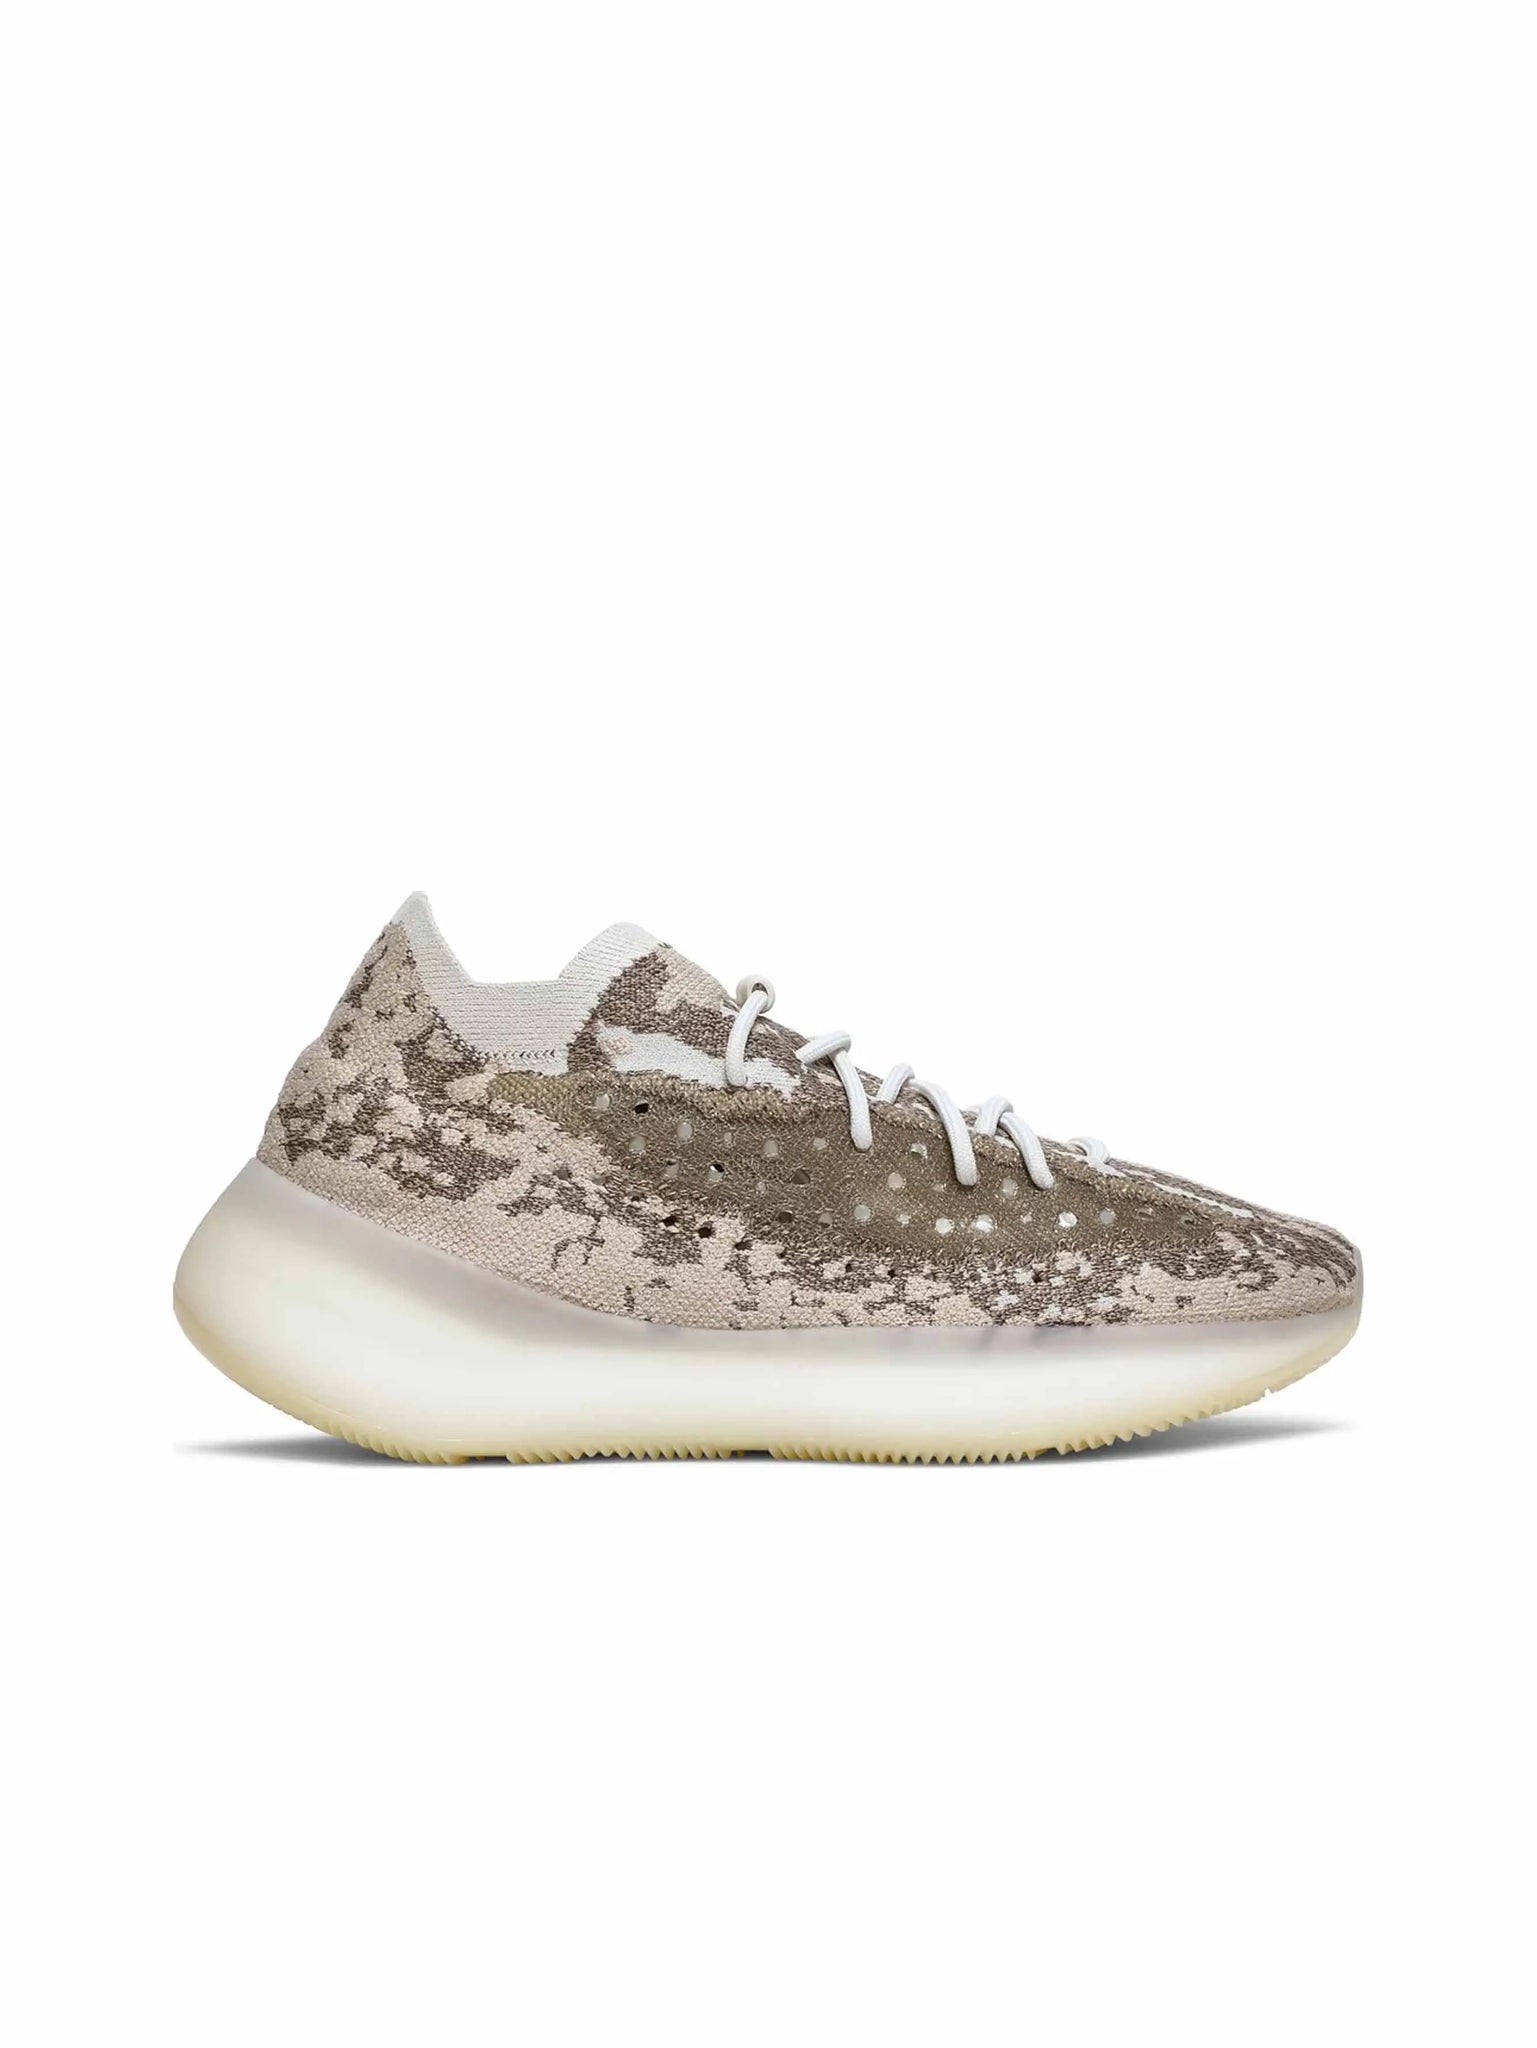 adidas Yeezy Boost 380 Pyrite in Auckland, New Zealand - Shop name